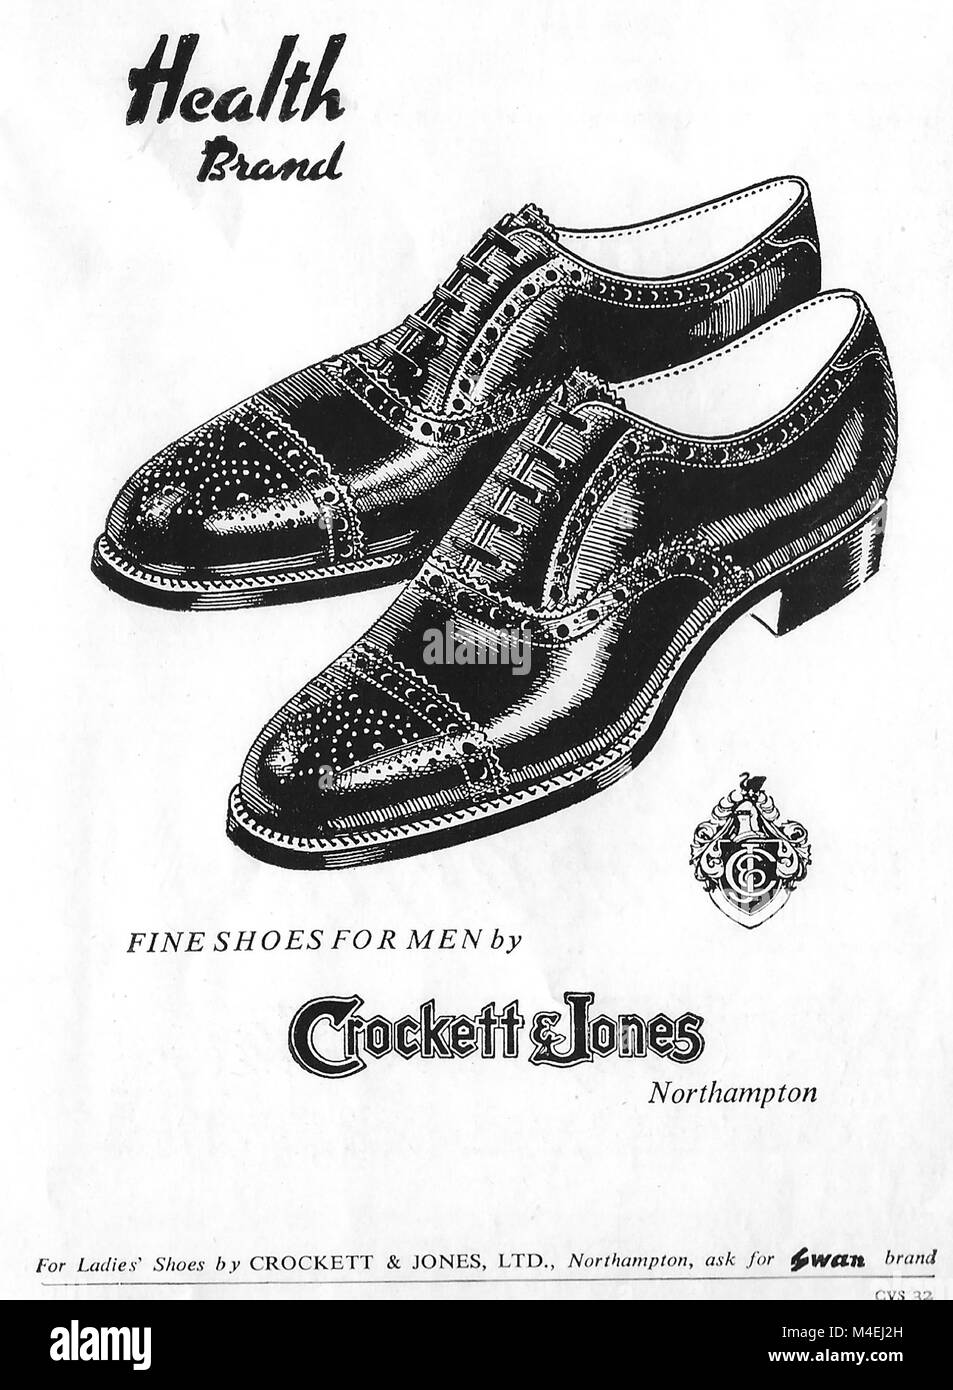 Crockett & Comes Health brand shoes for men advert, advertising in Country Life magazine UK 1951 Stock Photo